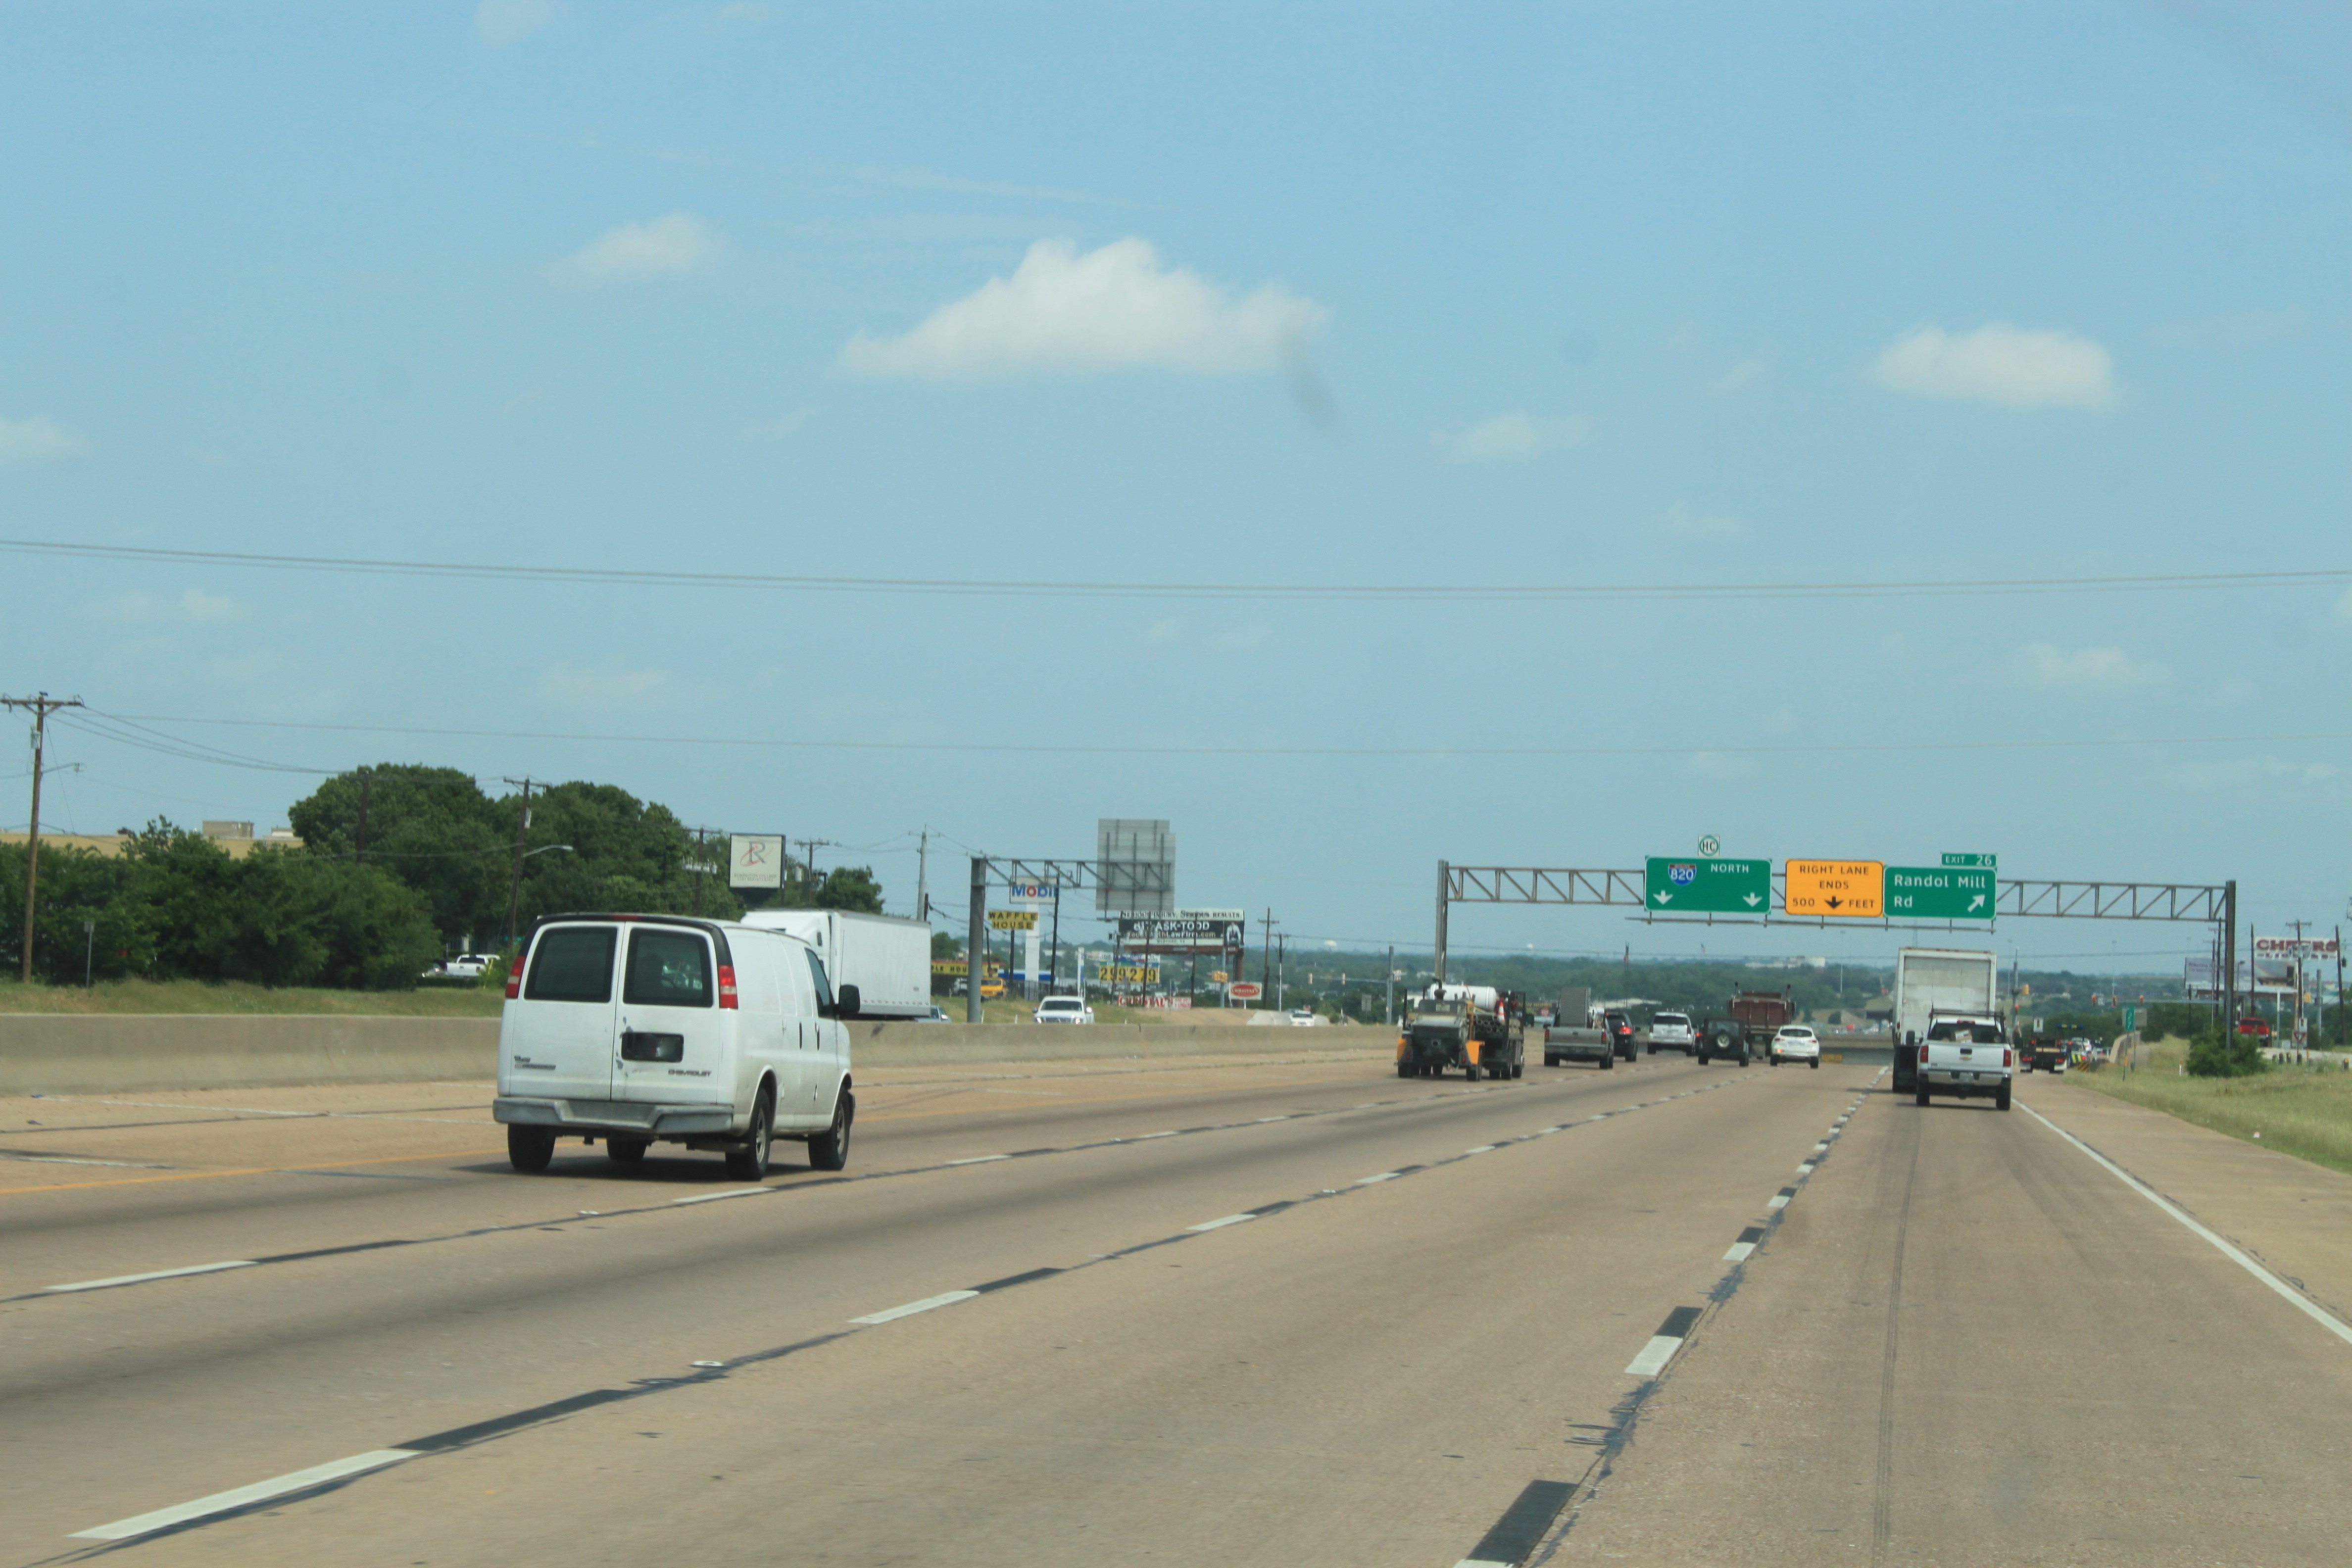 I-820 northbound approaching Randol Mill Rd. Large overhead sign in background showing exit to Randol Mill Rd, lane ending, and two through lanes for I-820.